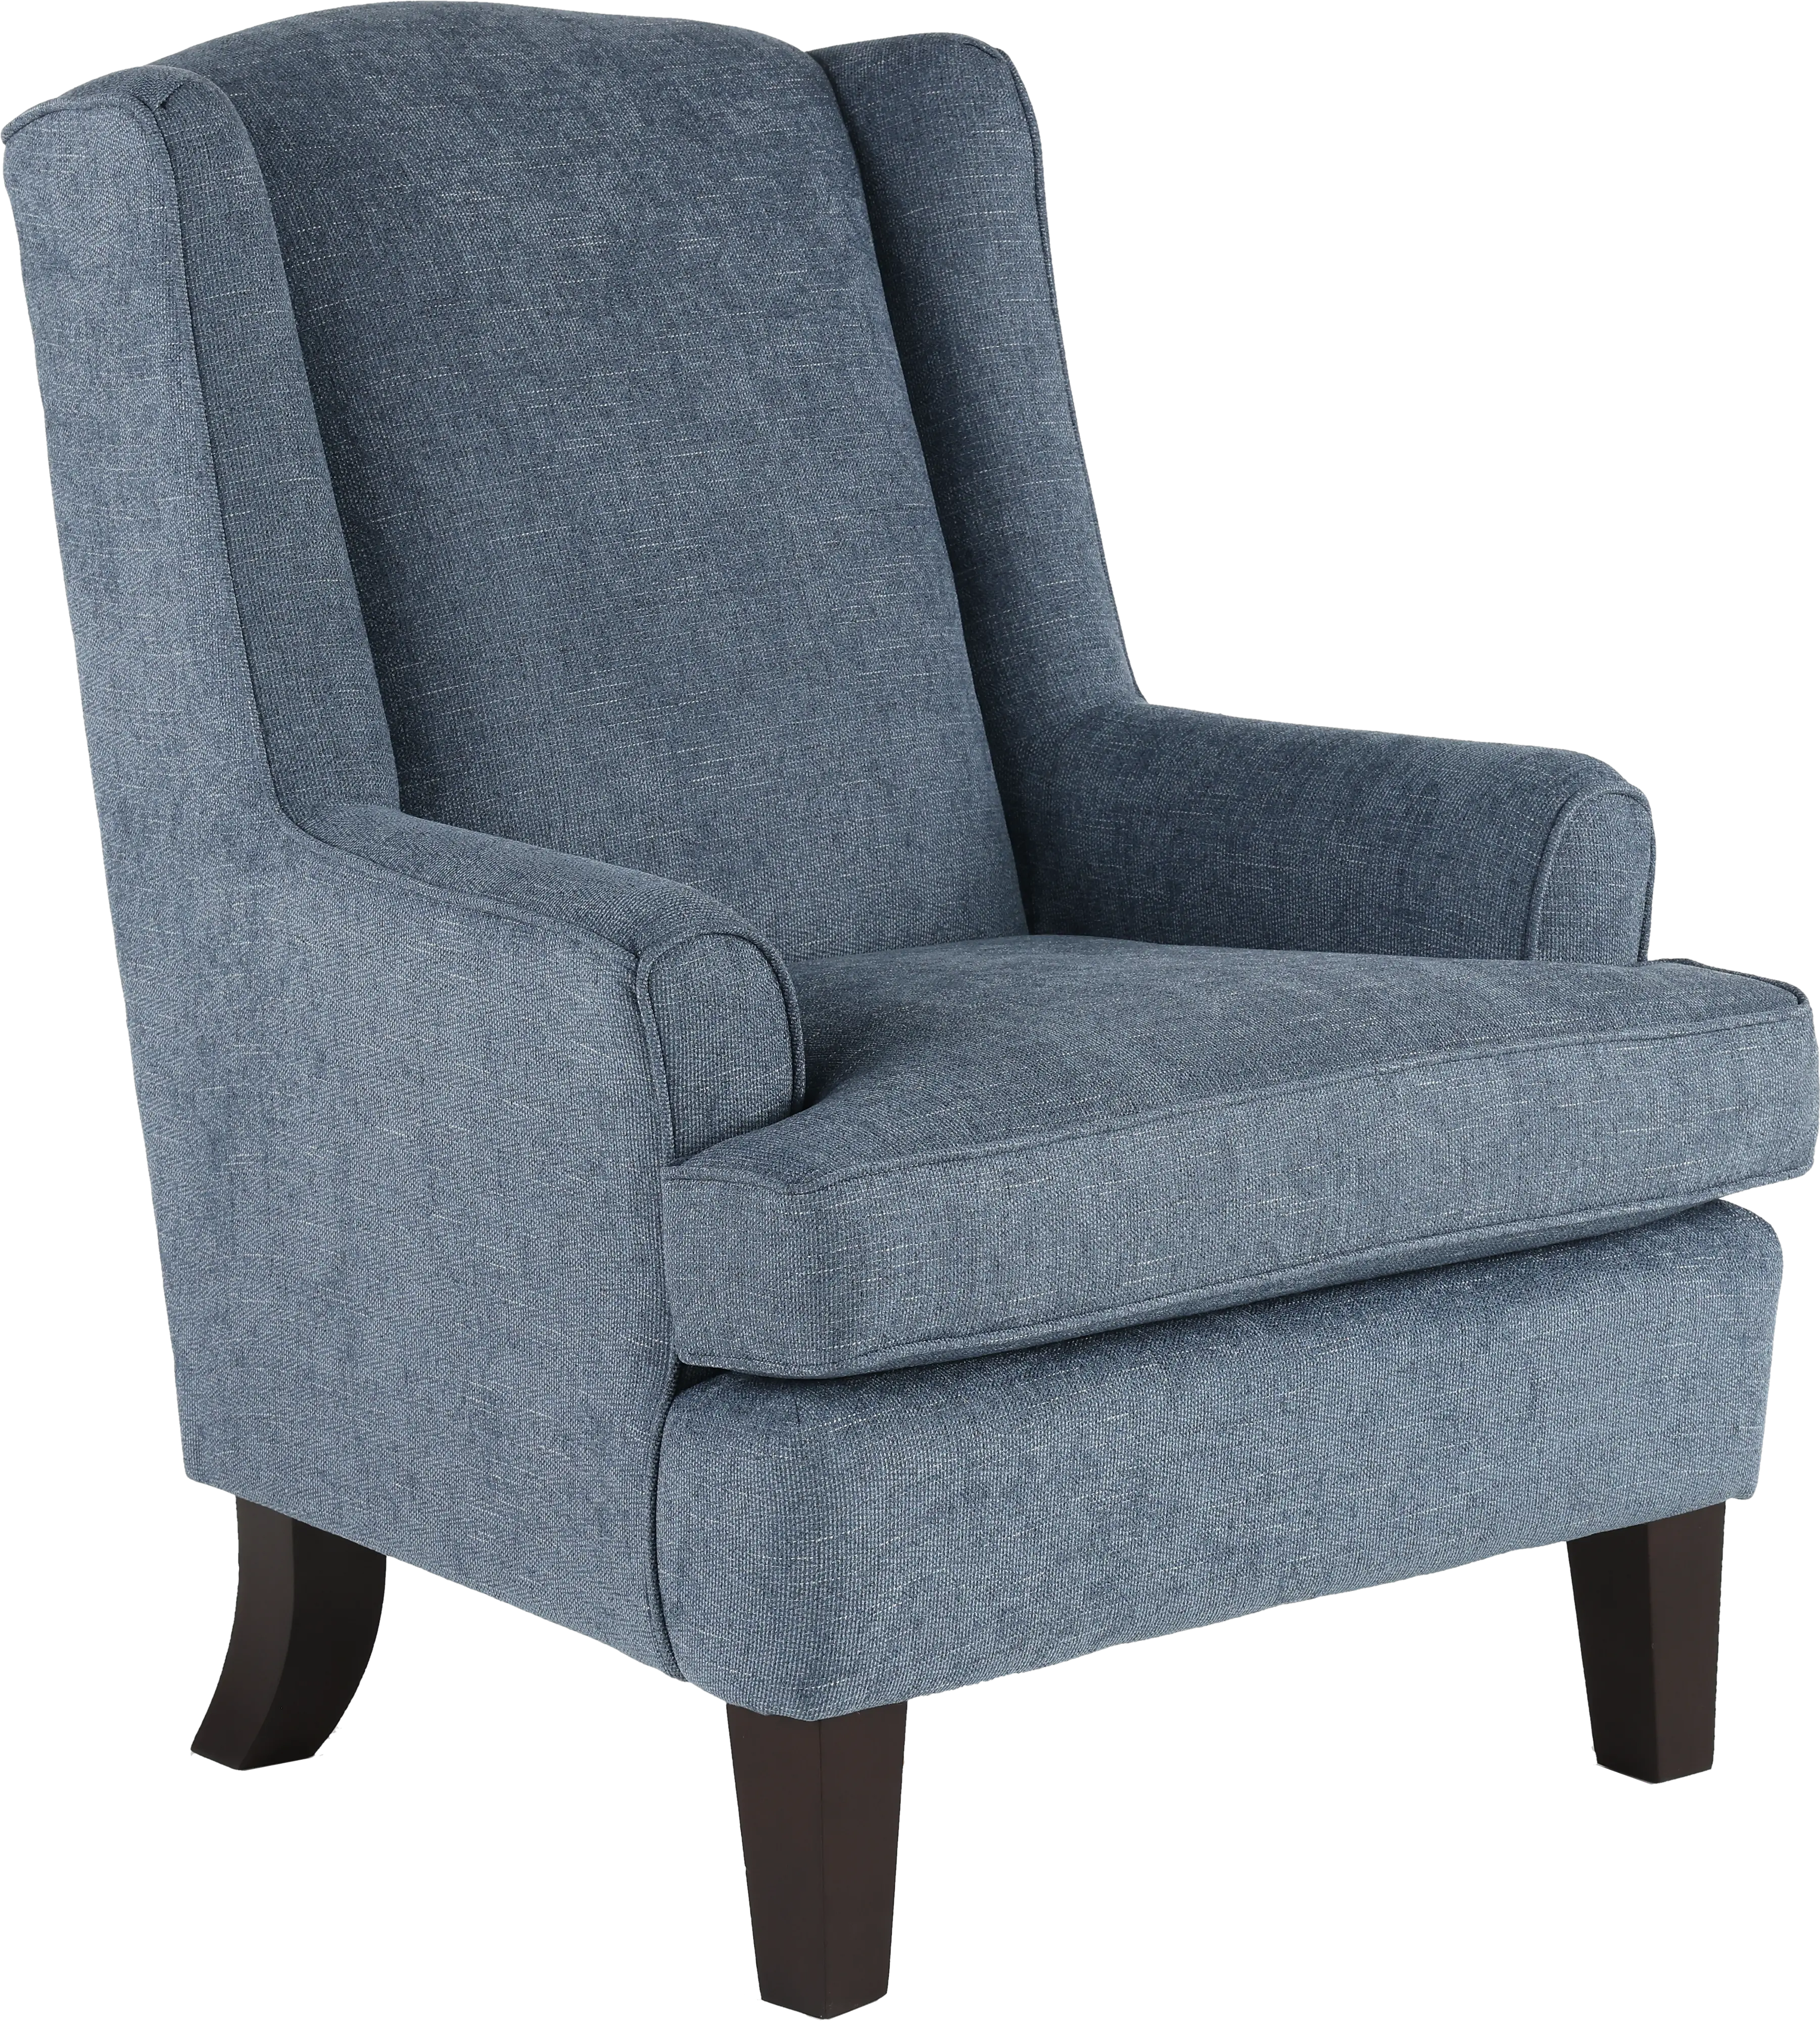 Andrea Classic Atlantic Blue Upholstered Wingback Chair